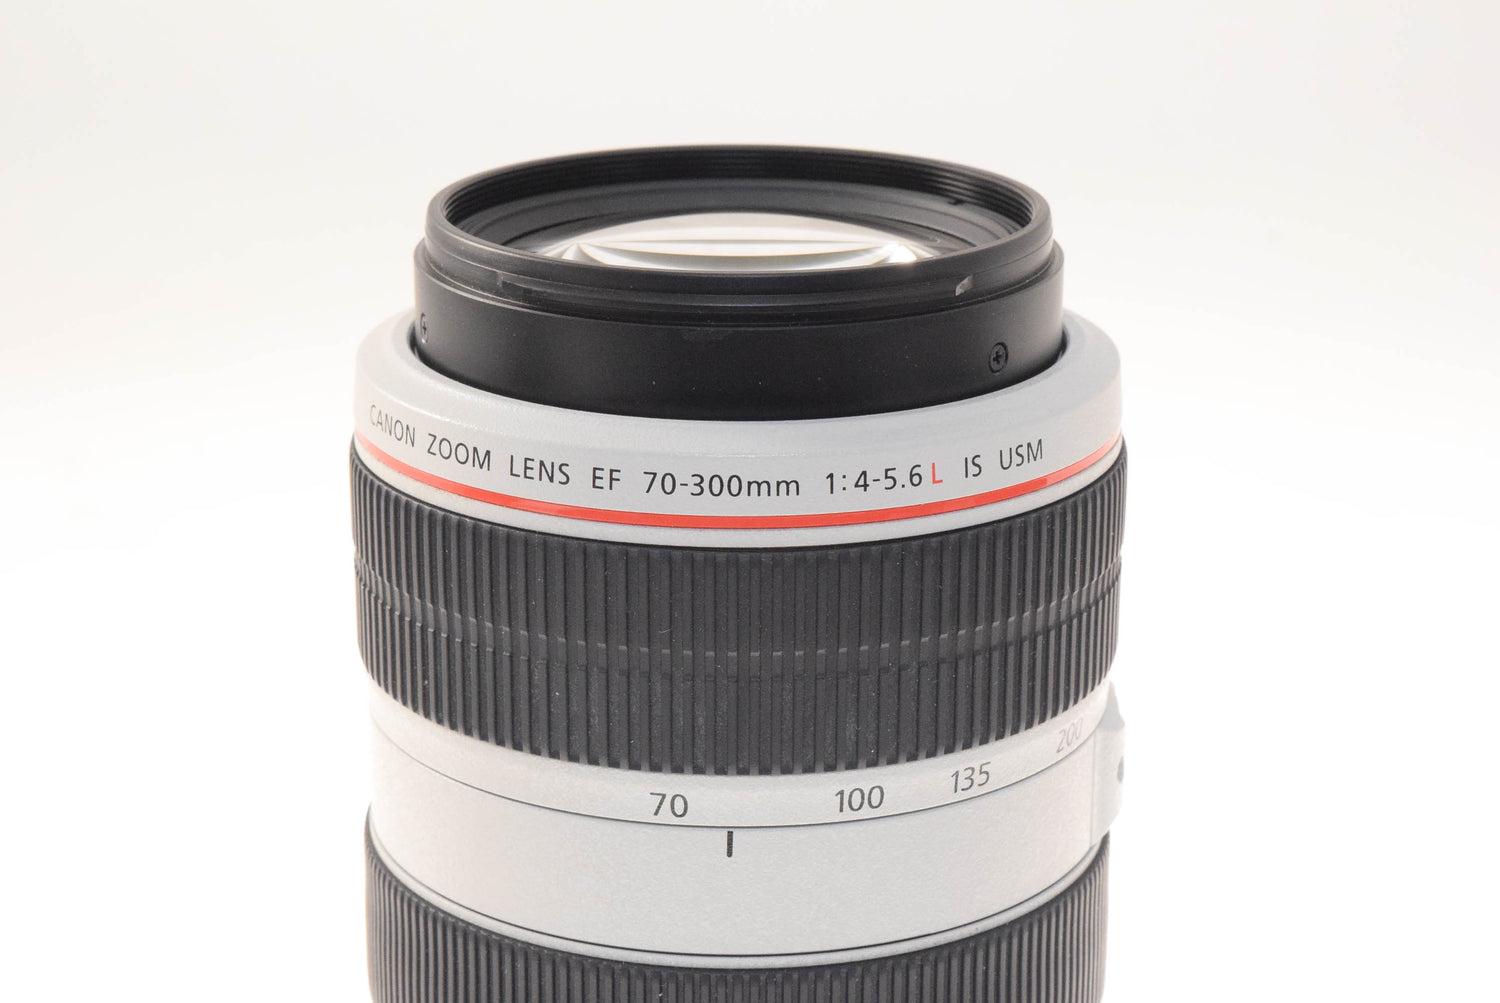 Canon 70-300mm f4-5.6 L IS USM